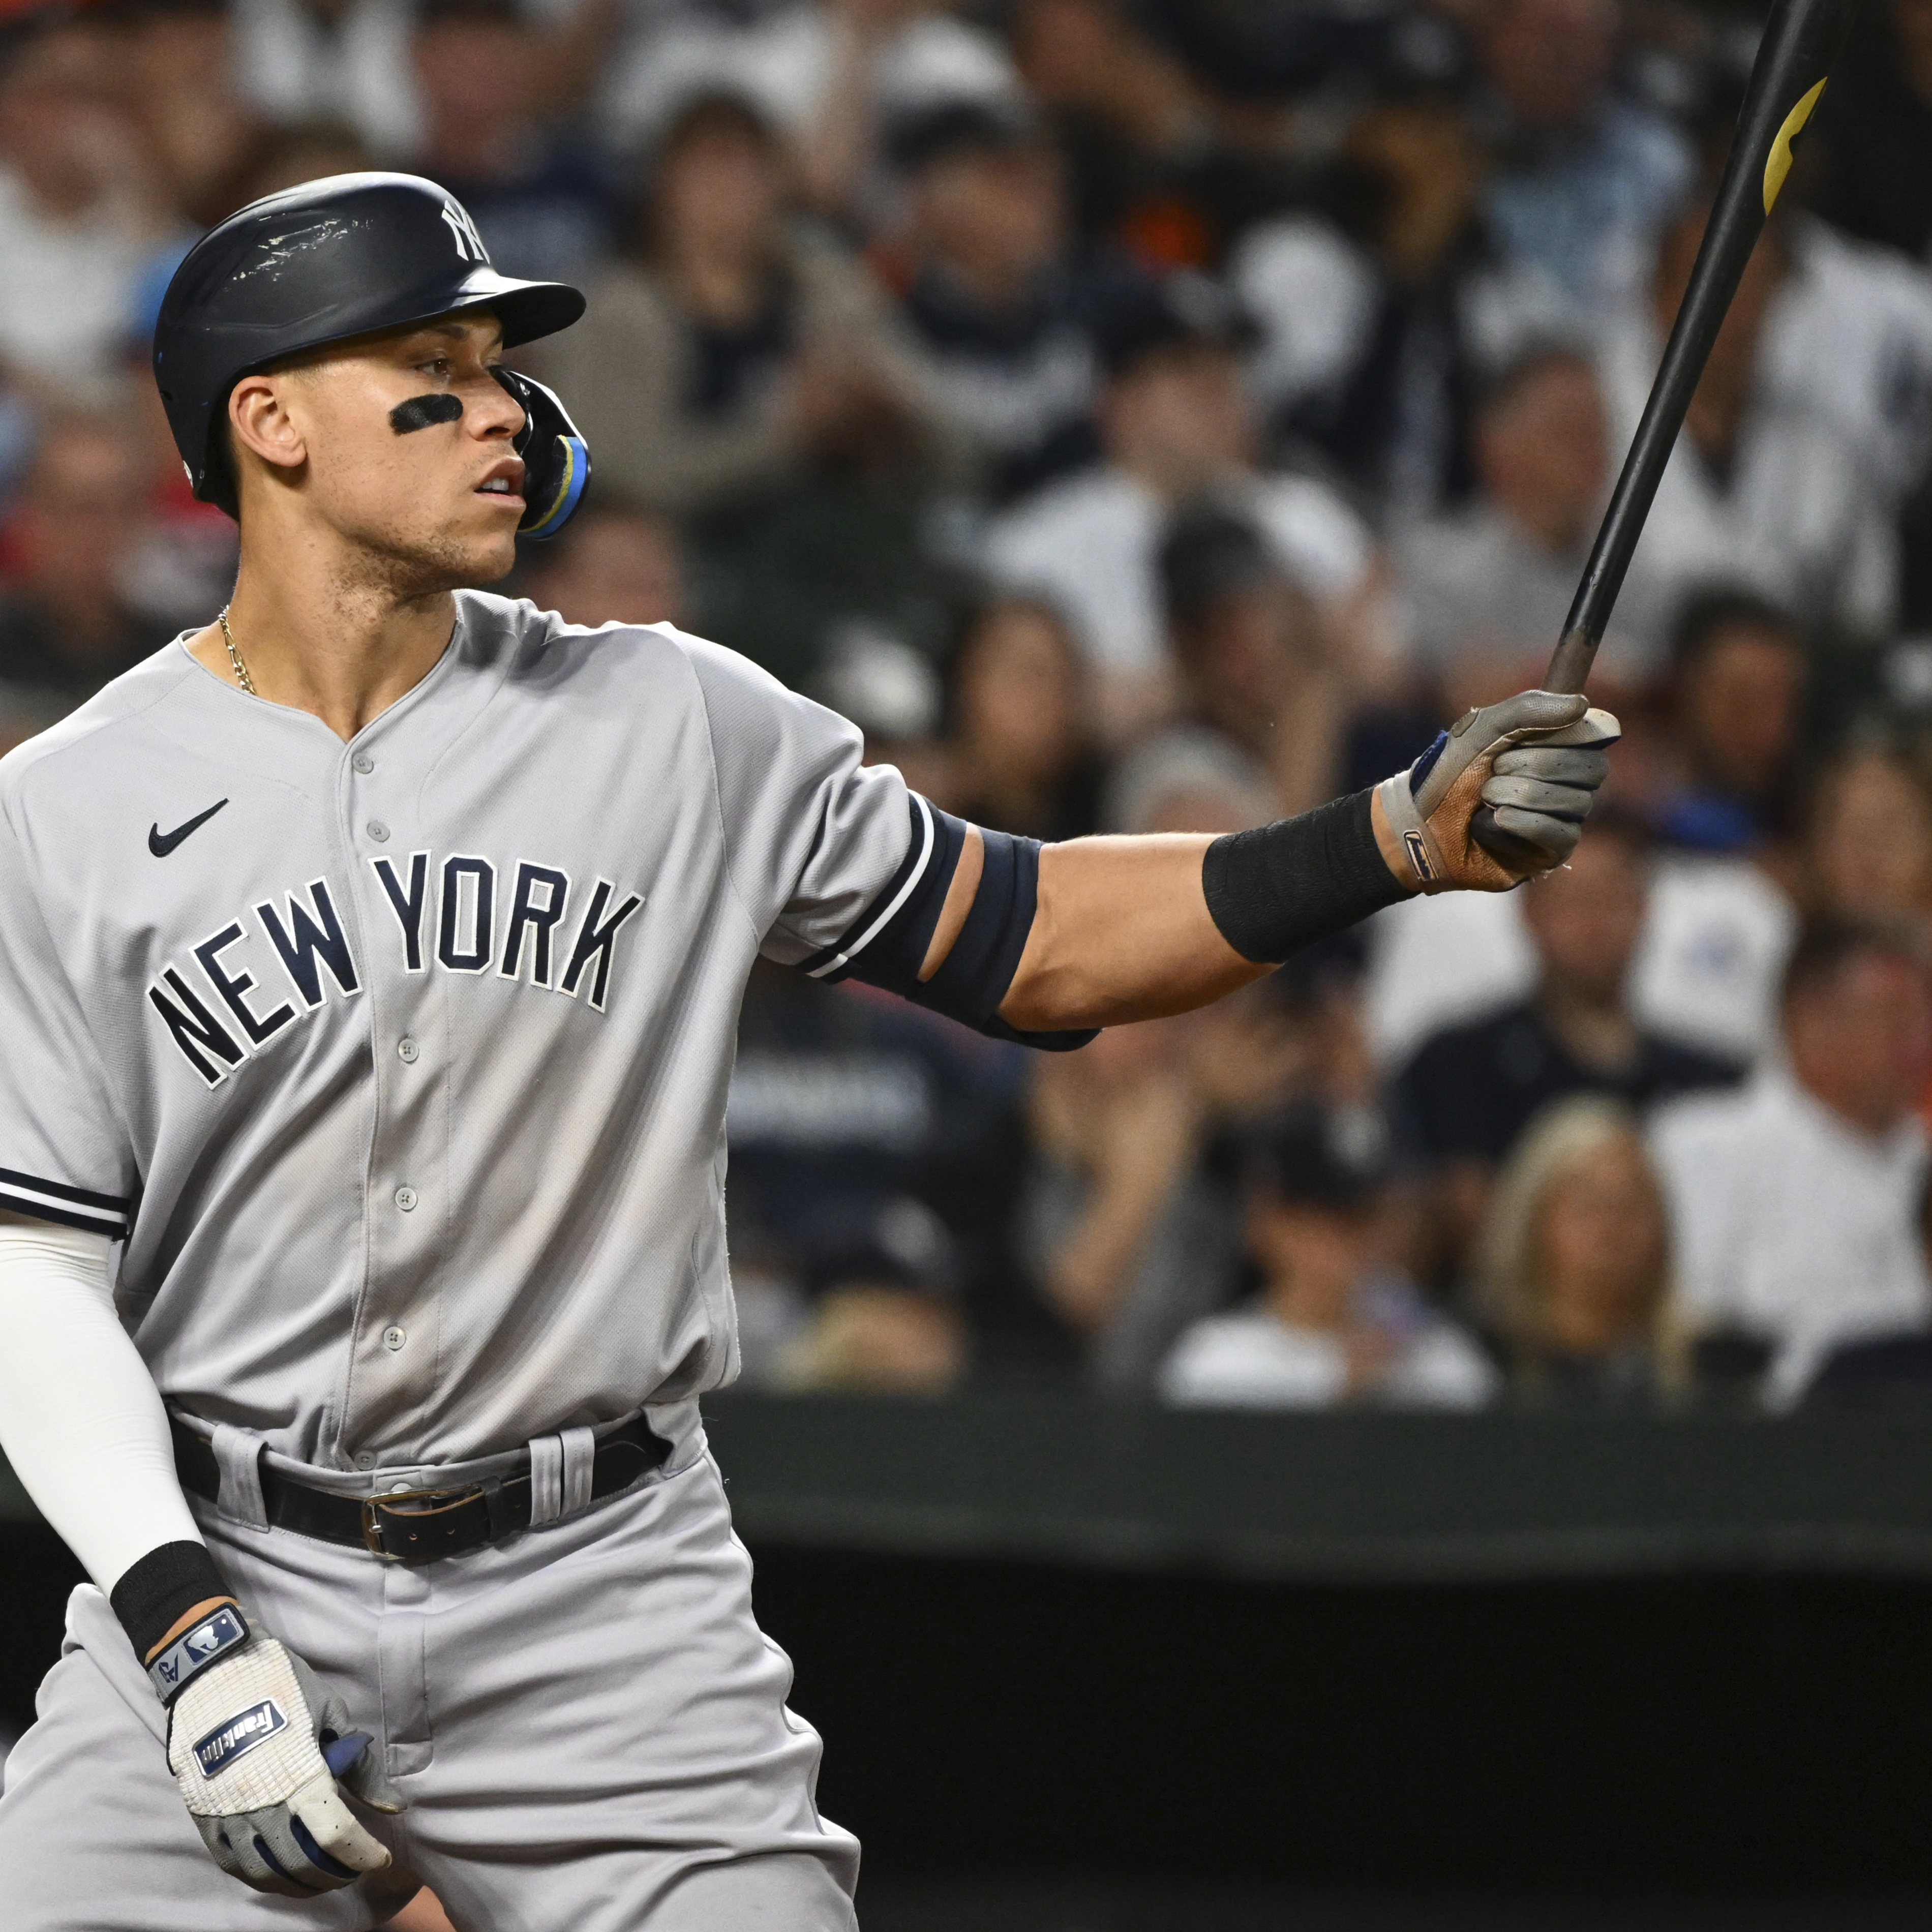 Yankees Rumors: Aaron Judge Expected to Command $300M Contract in Free Agency